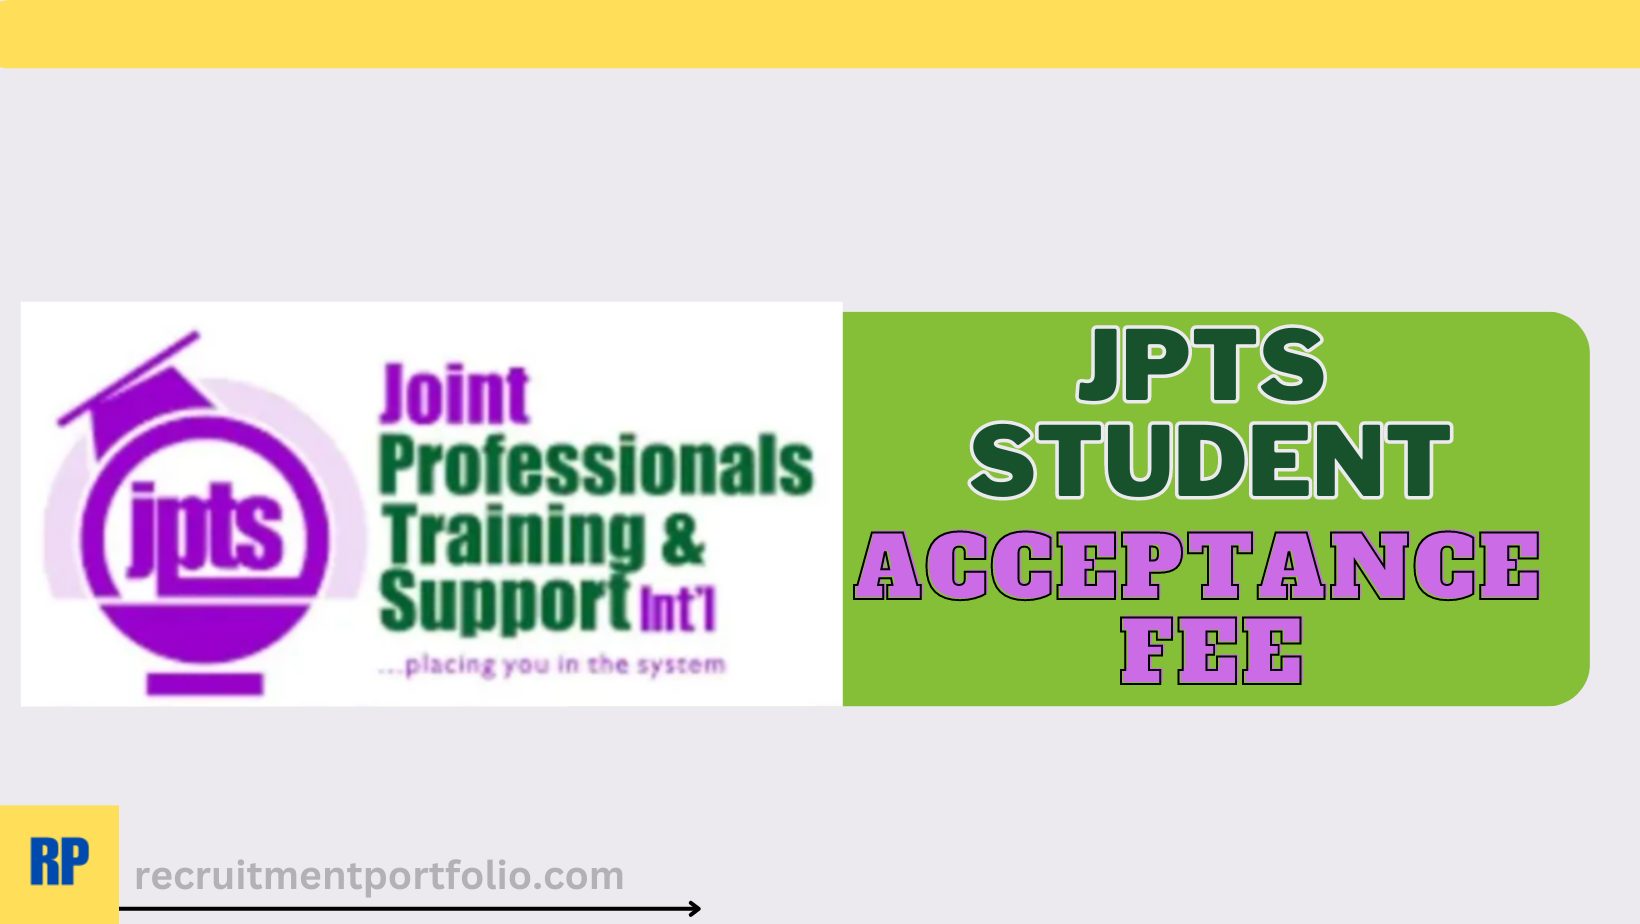 JPTS Student Acceptance Fee